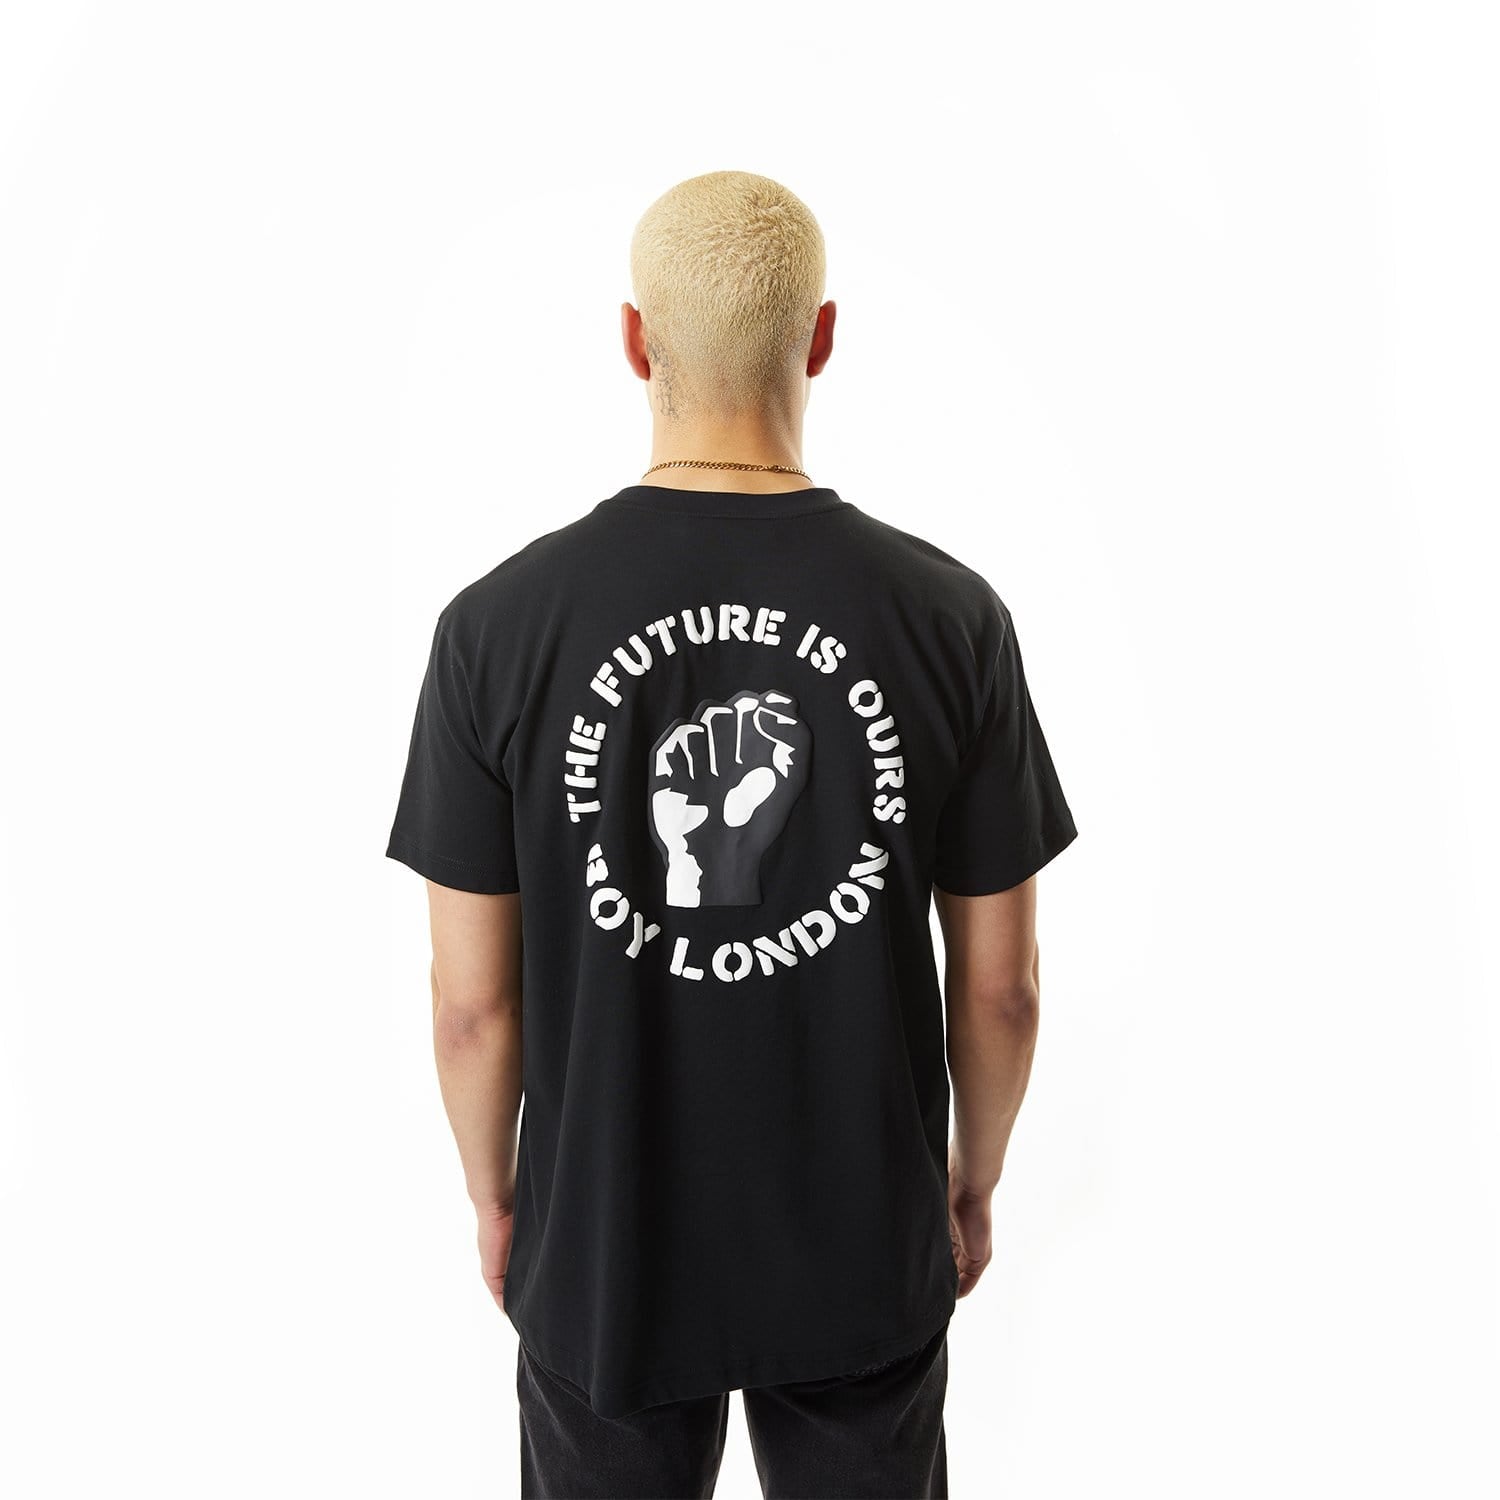 BOY LONDON】「THE FUTURE IS OURS」 TEE-